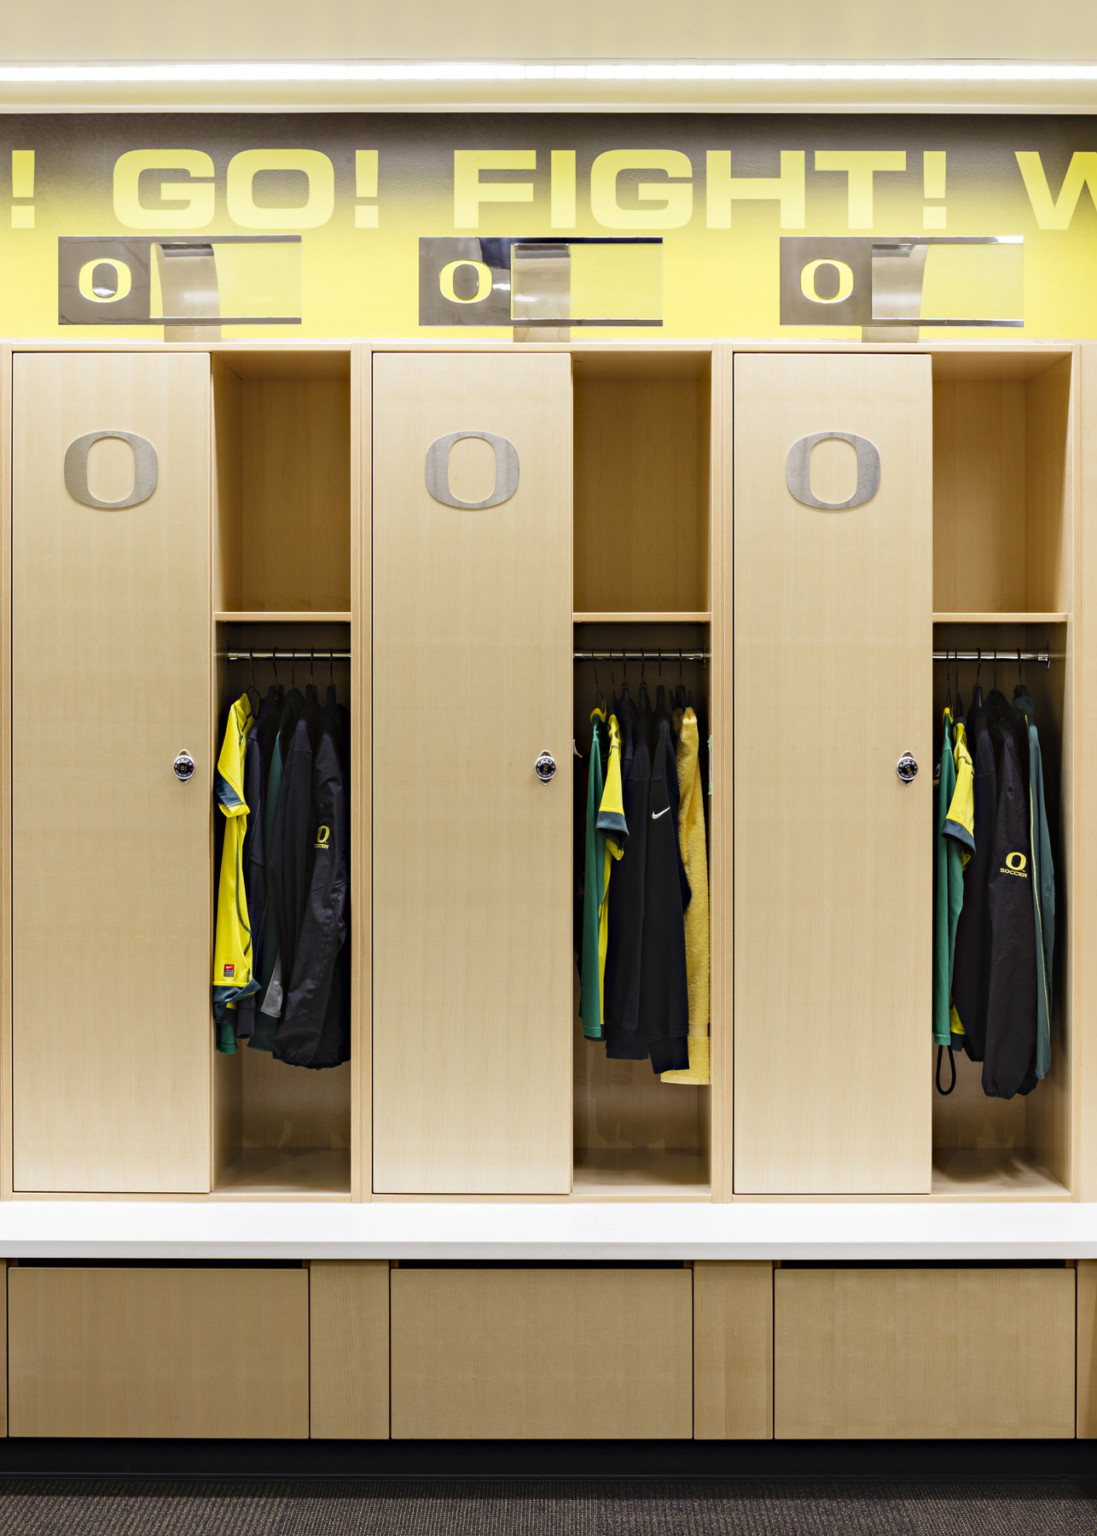 Closeup of wood lockers with Oregon logo on doors and exposed hanger and shelf. White bench. Above, fight song and nameplates